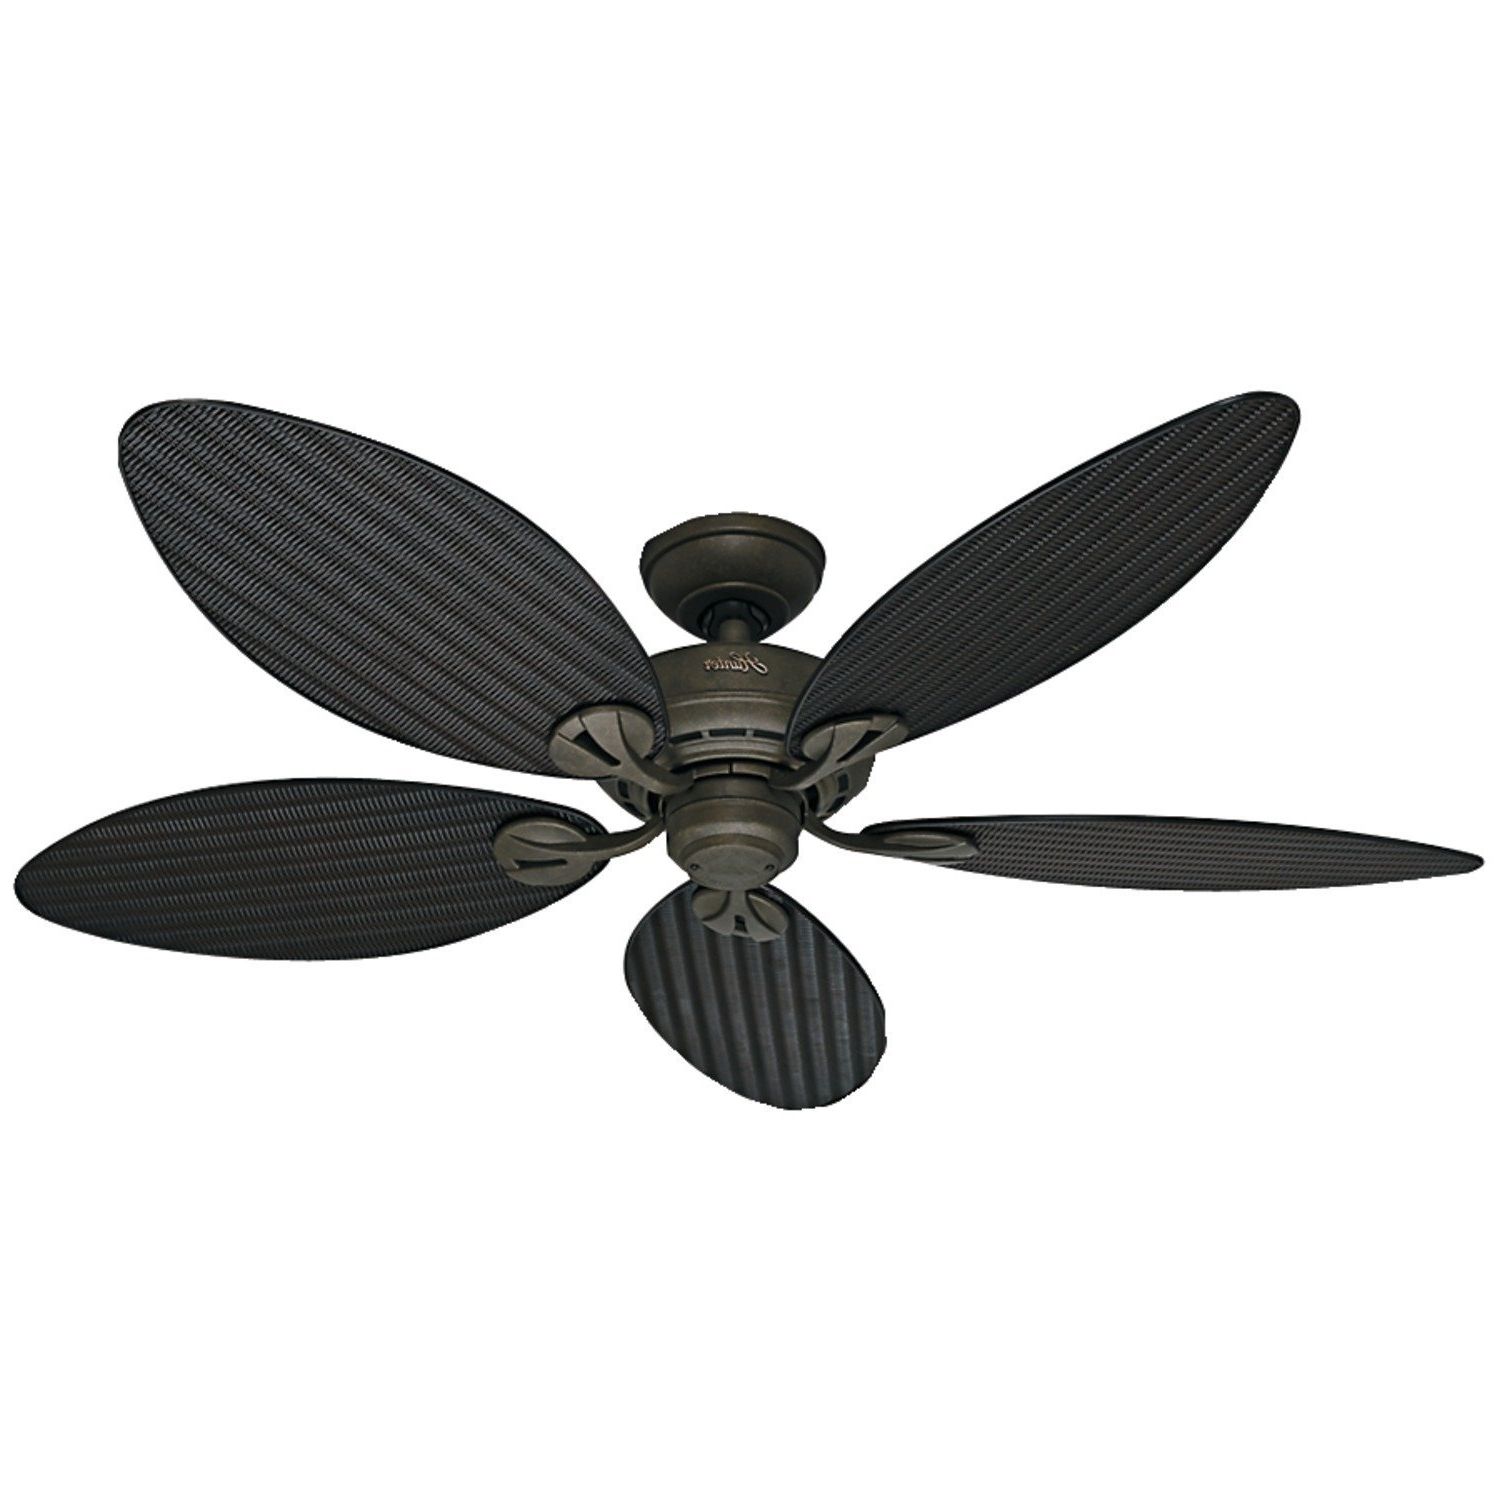 Ceiling: Marvellous Ceiling Fans With Leaf Shaped Blades Wicker Intended For Famous Outdoor Ceiling Fans With Plastic Blades (View 8 of 20)